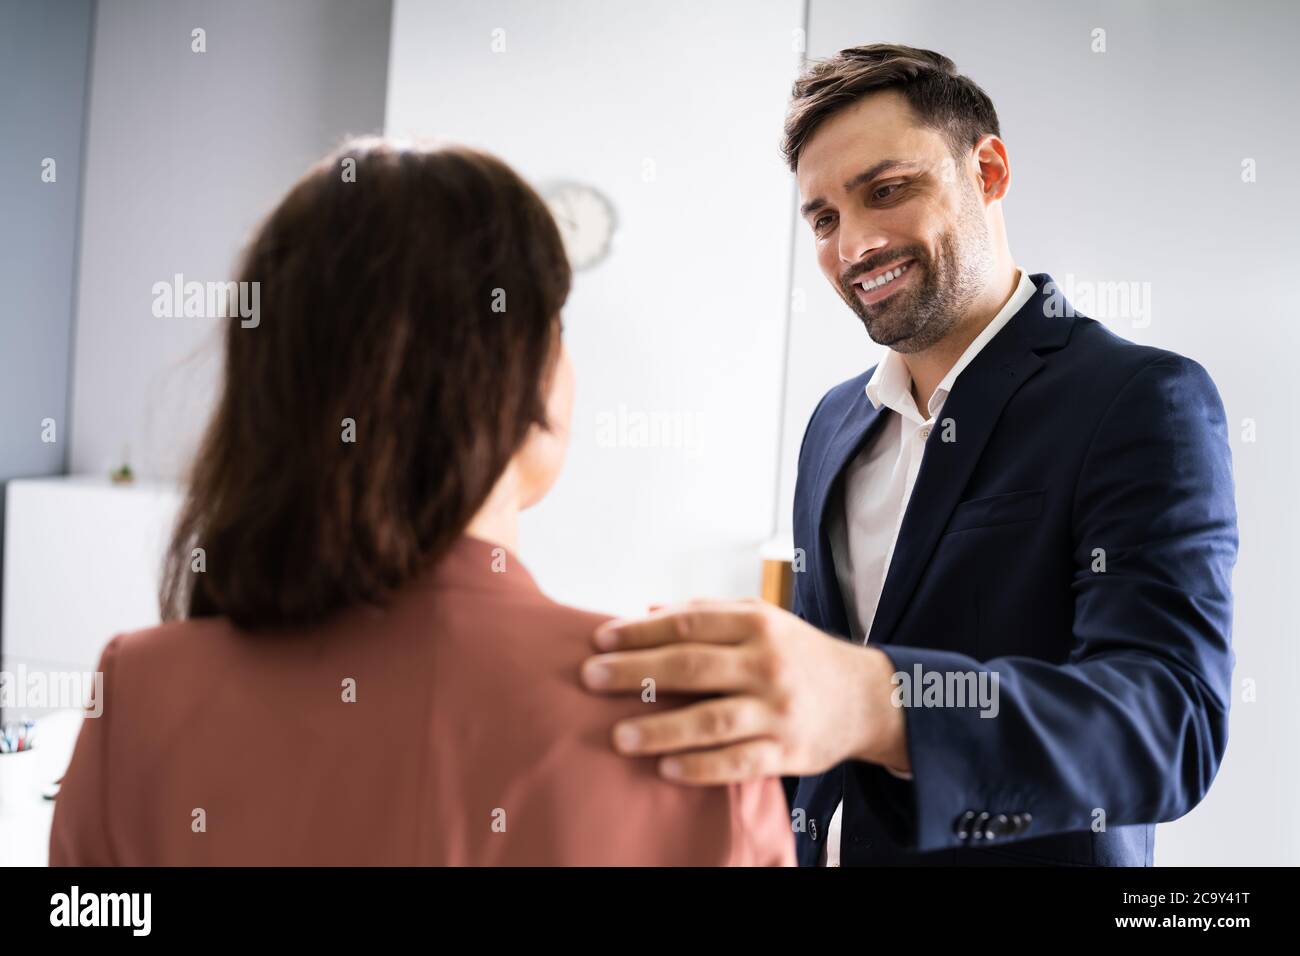 Man Putting His Hand On Woman's Shoulder Stock Photo